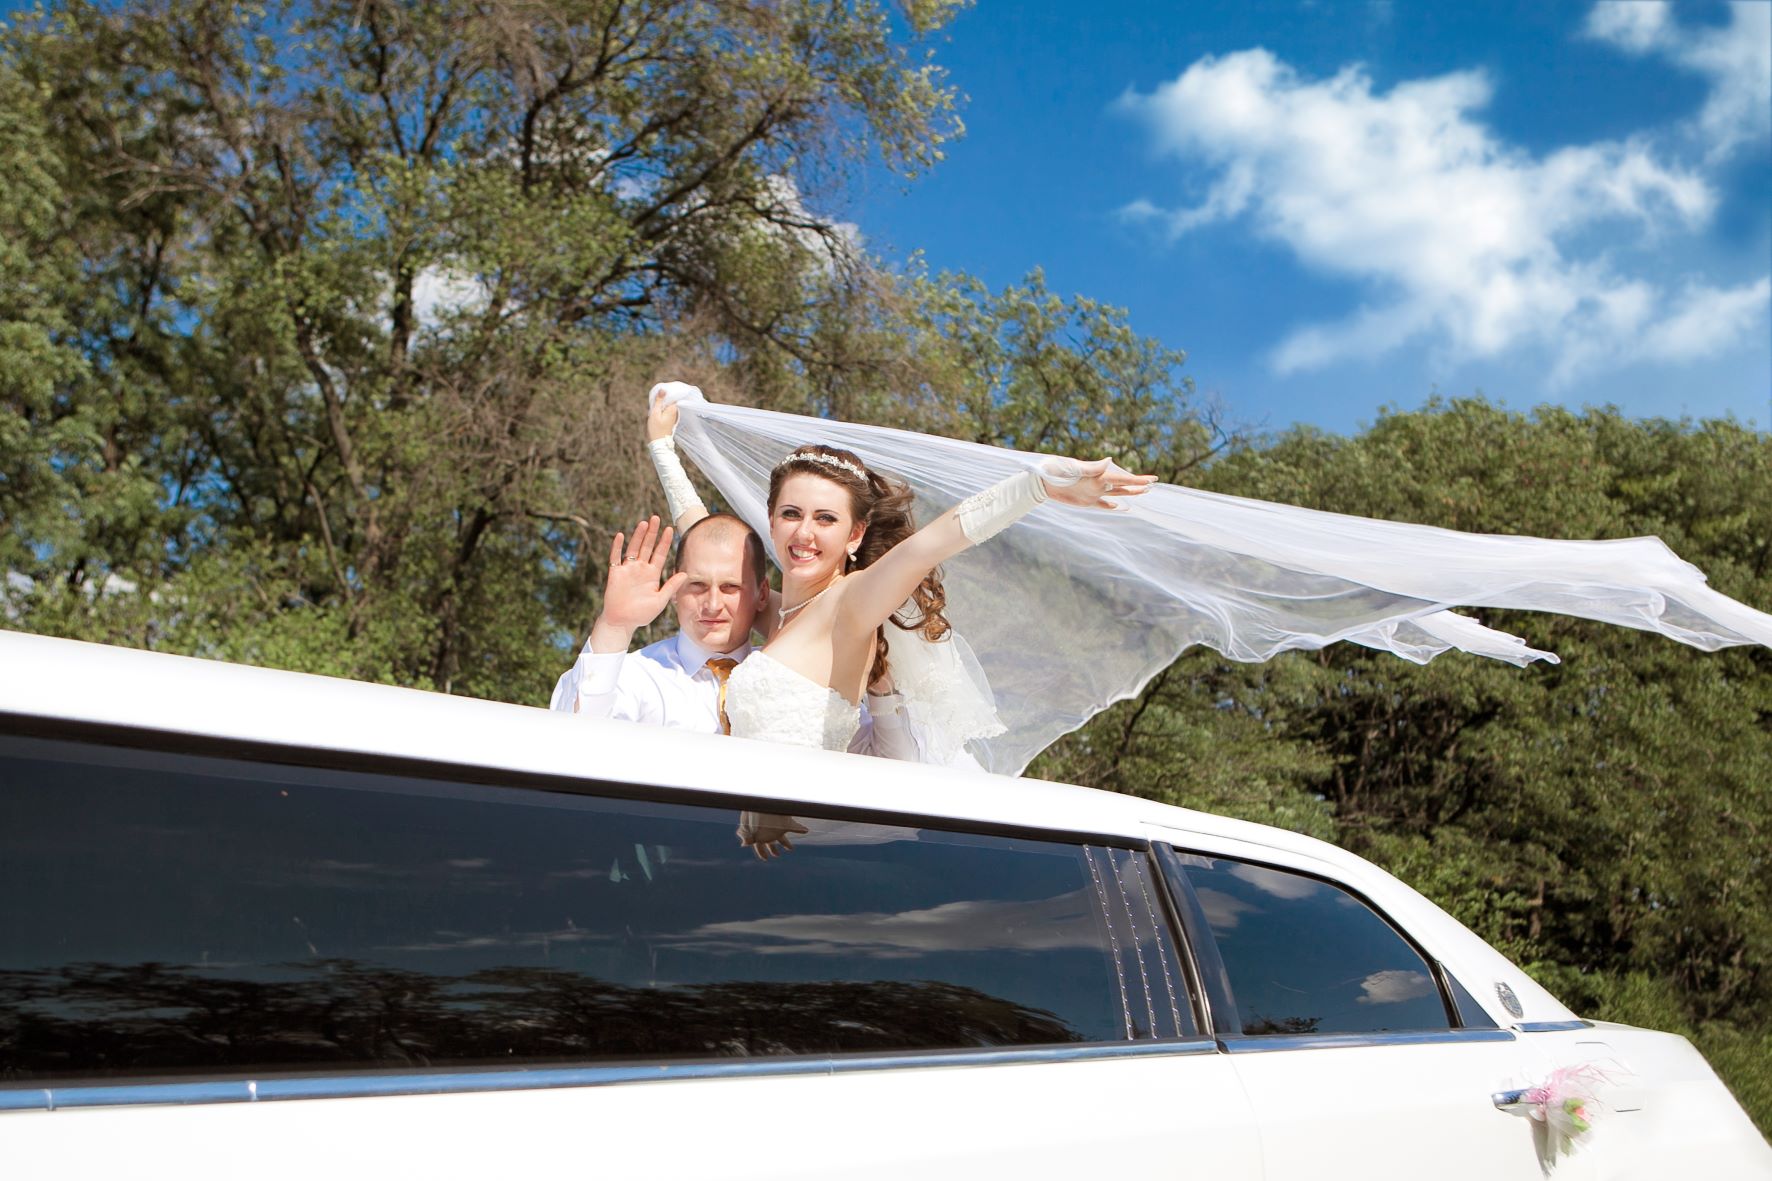 Bride and groom standing in Limo waving